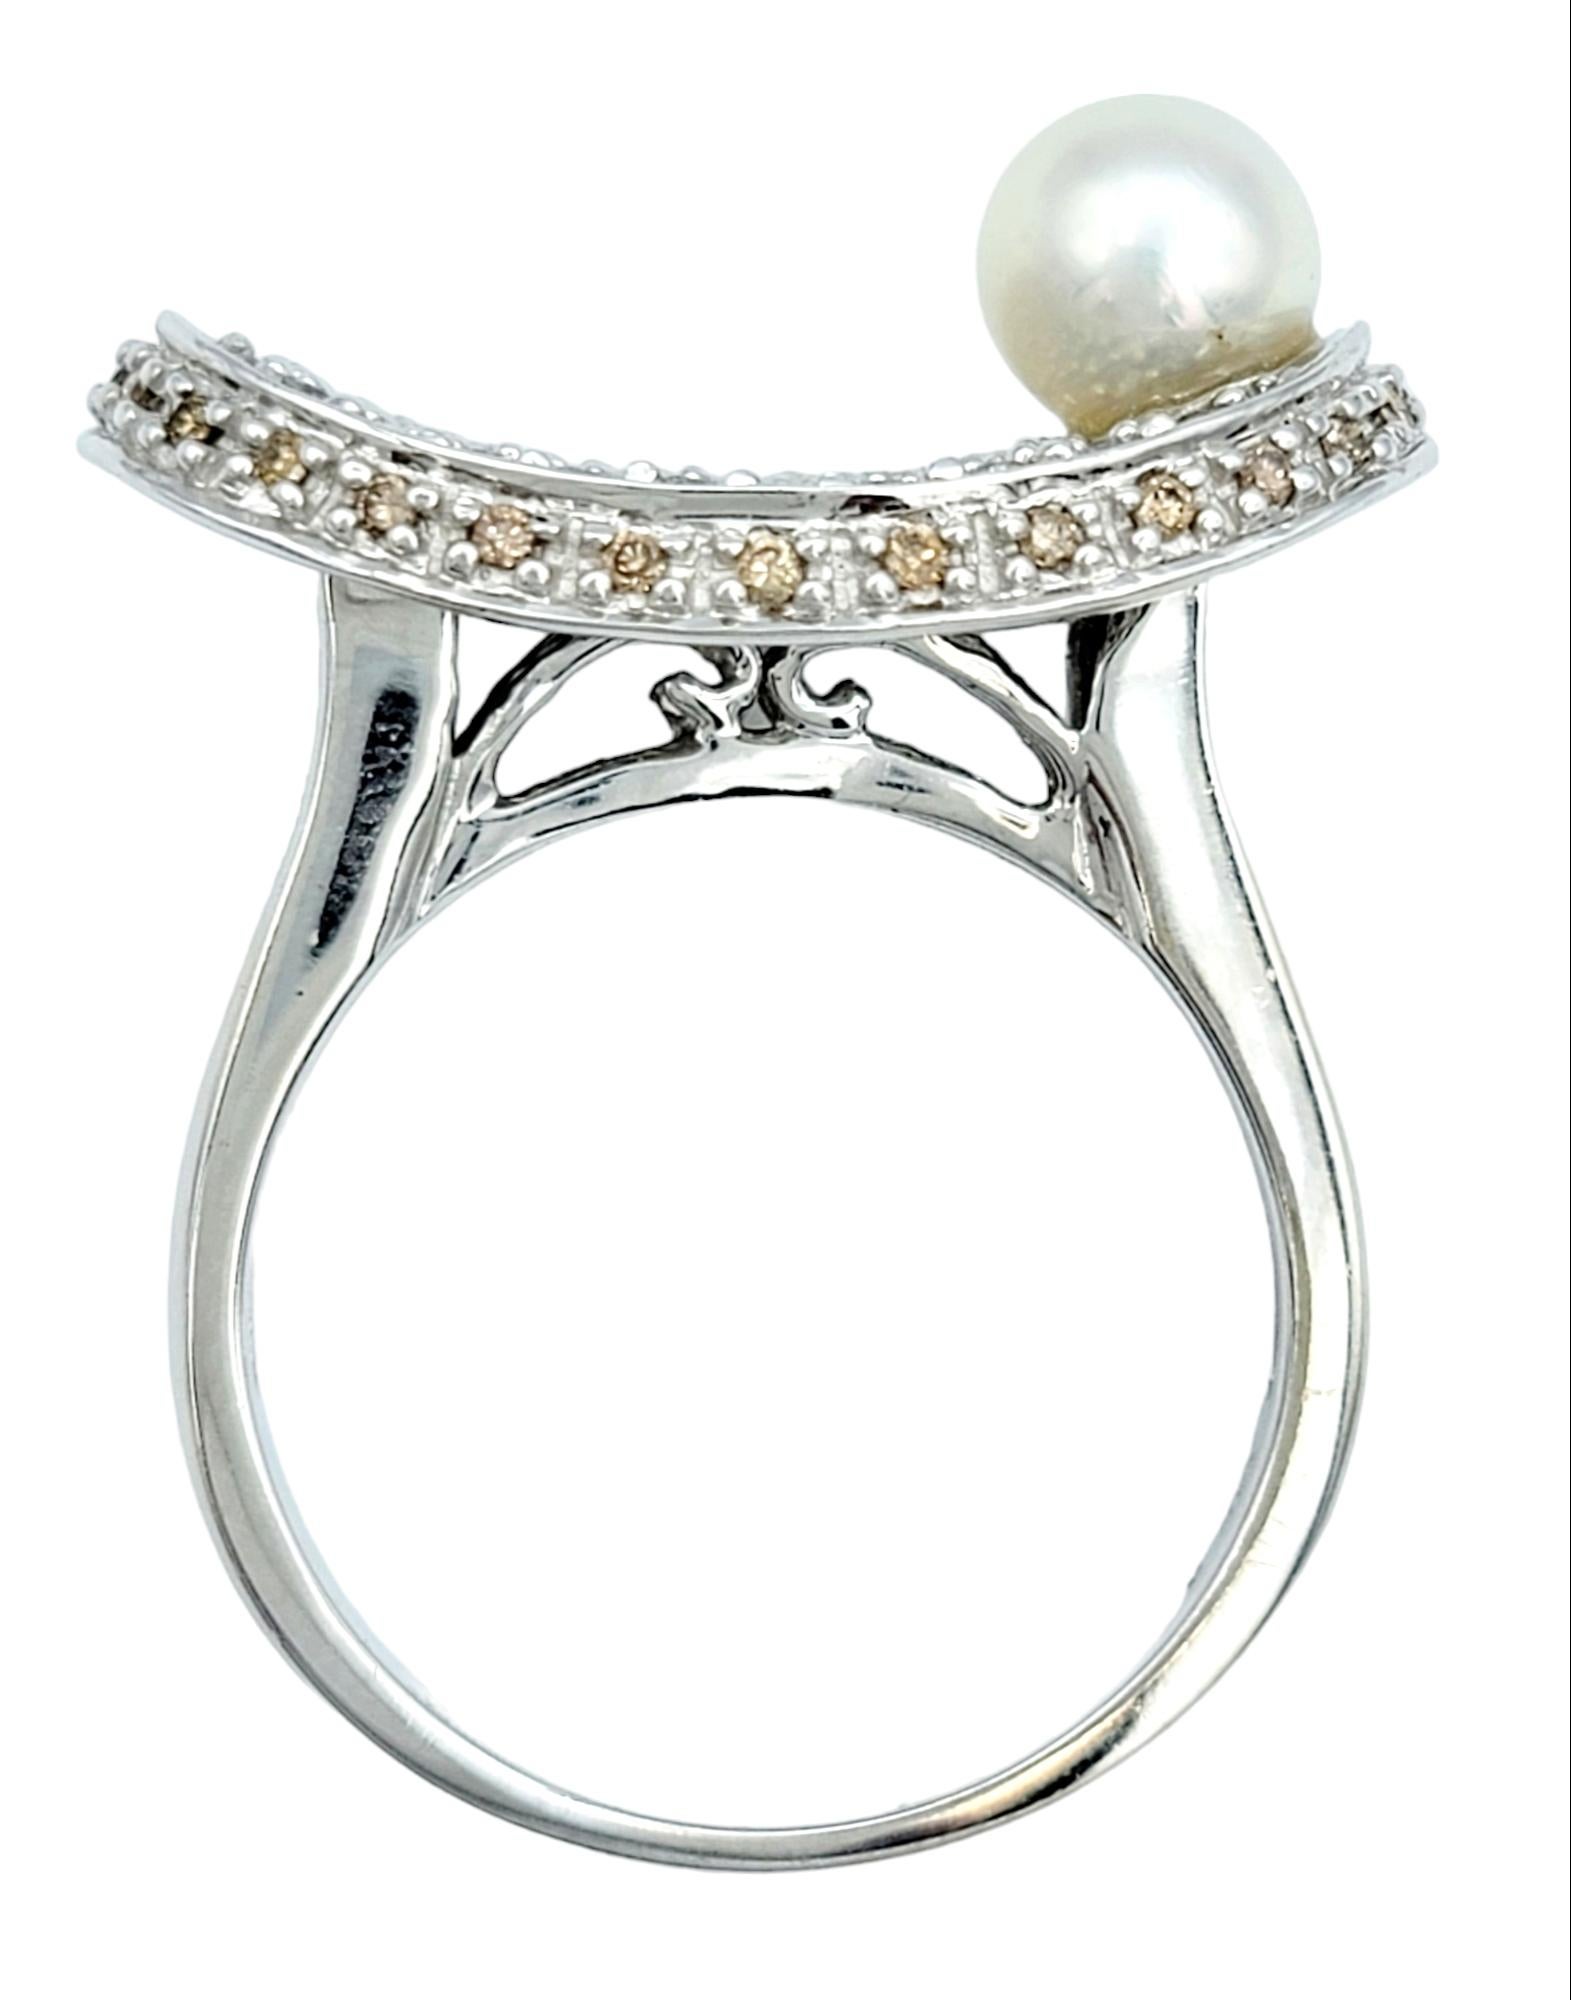 Women's Pave Diamond and Akoya Pearl Oval Concave Cocktail Ring in 14 Karat White Gold For Sale